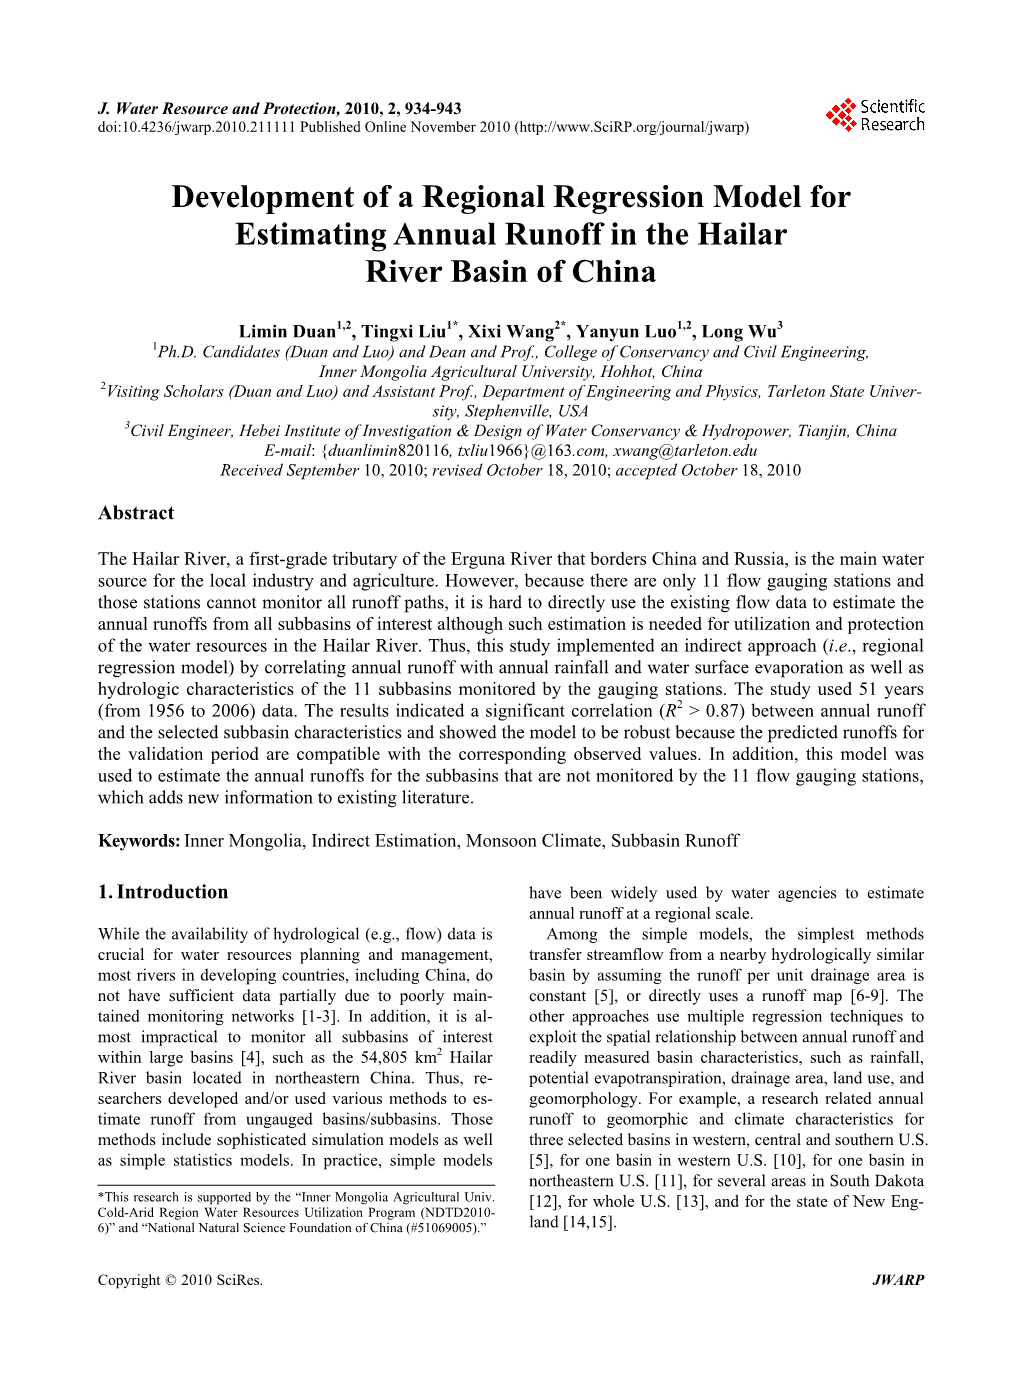 Development of a Regional Regression Model for Estimating Annual Runoff in the Hailar River Basin of China